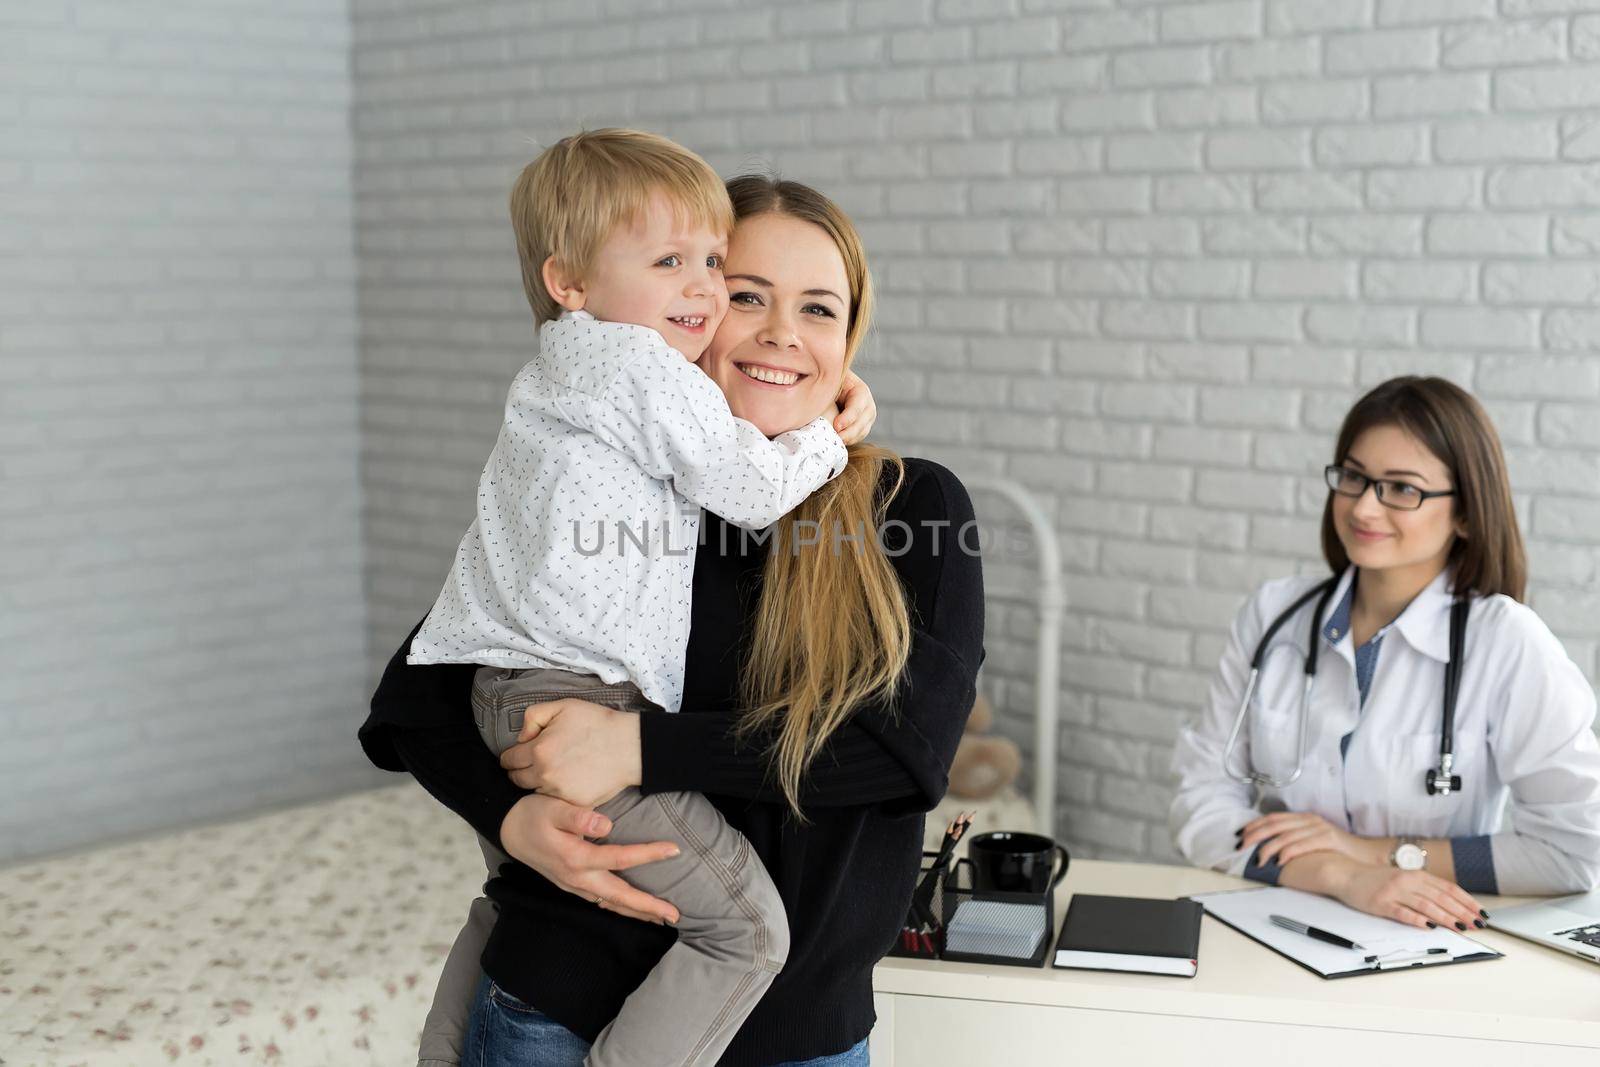 Portrait of mother and child at a doctor's appointment. Pediatrician meeting with mother and child in hospital by StudioPeace